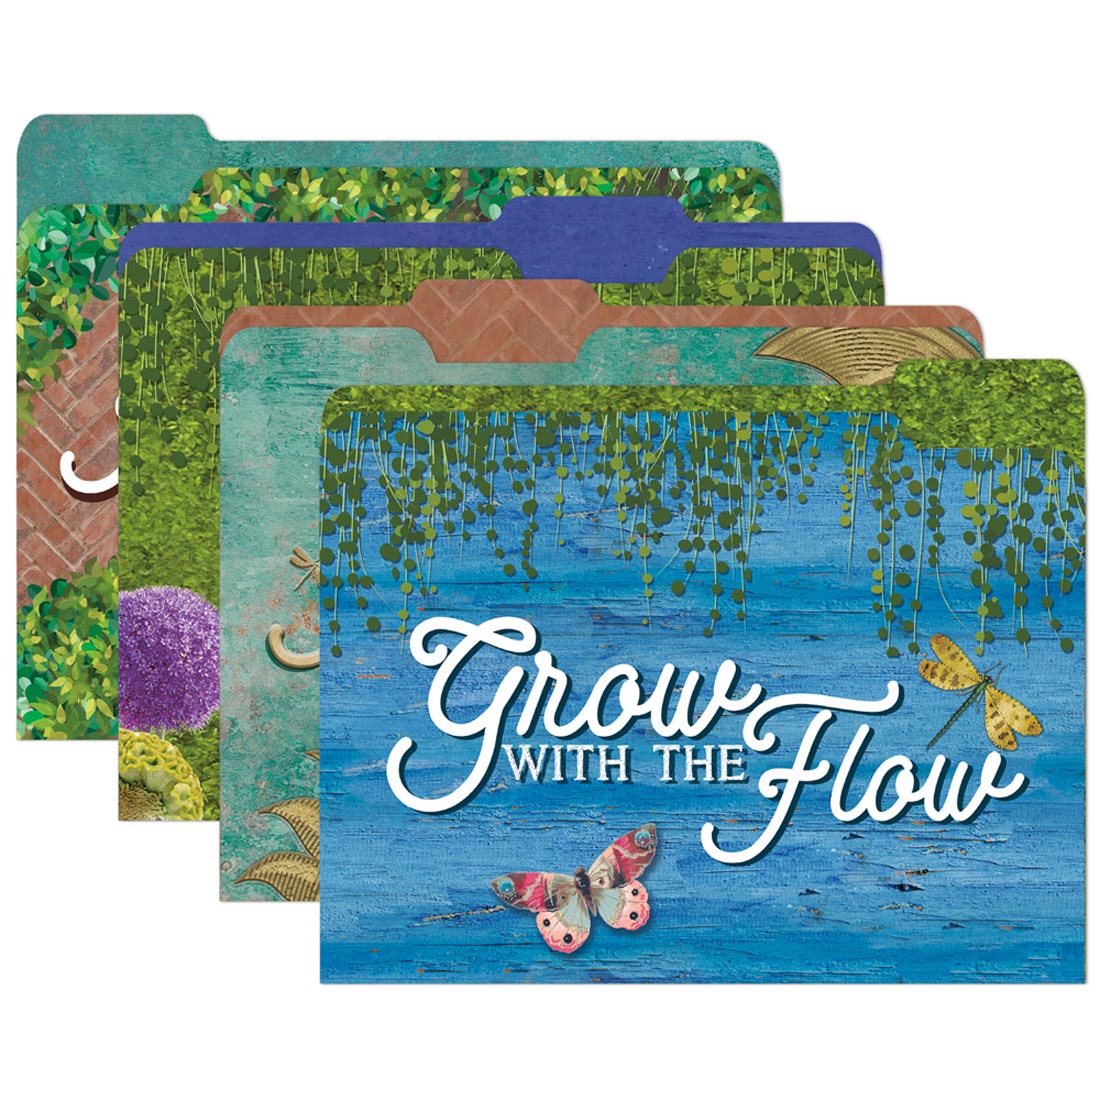 Curiosity Garden File Folders By Eureka; the top one says Grow with the flow